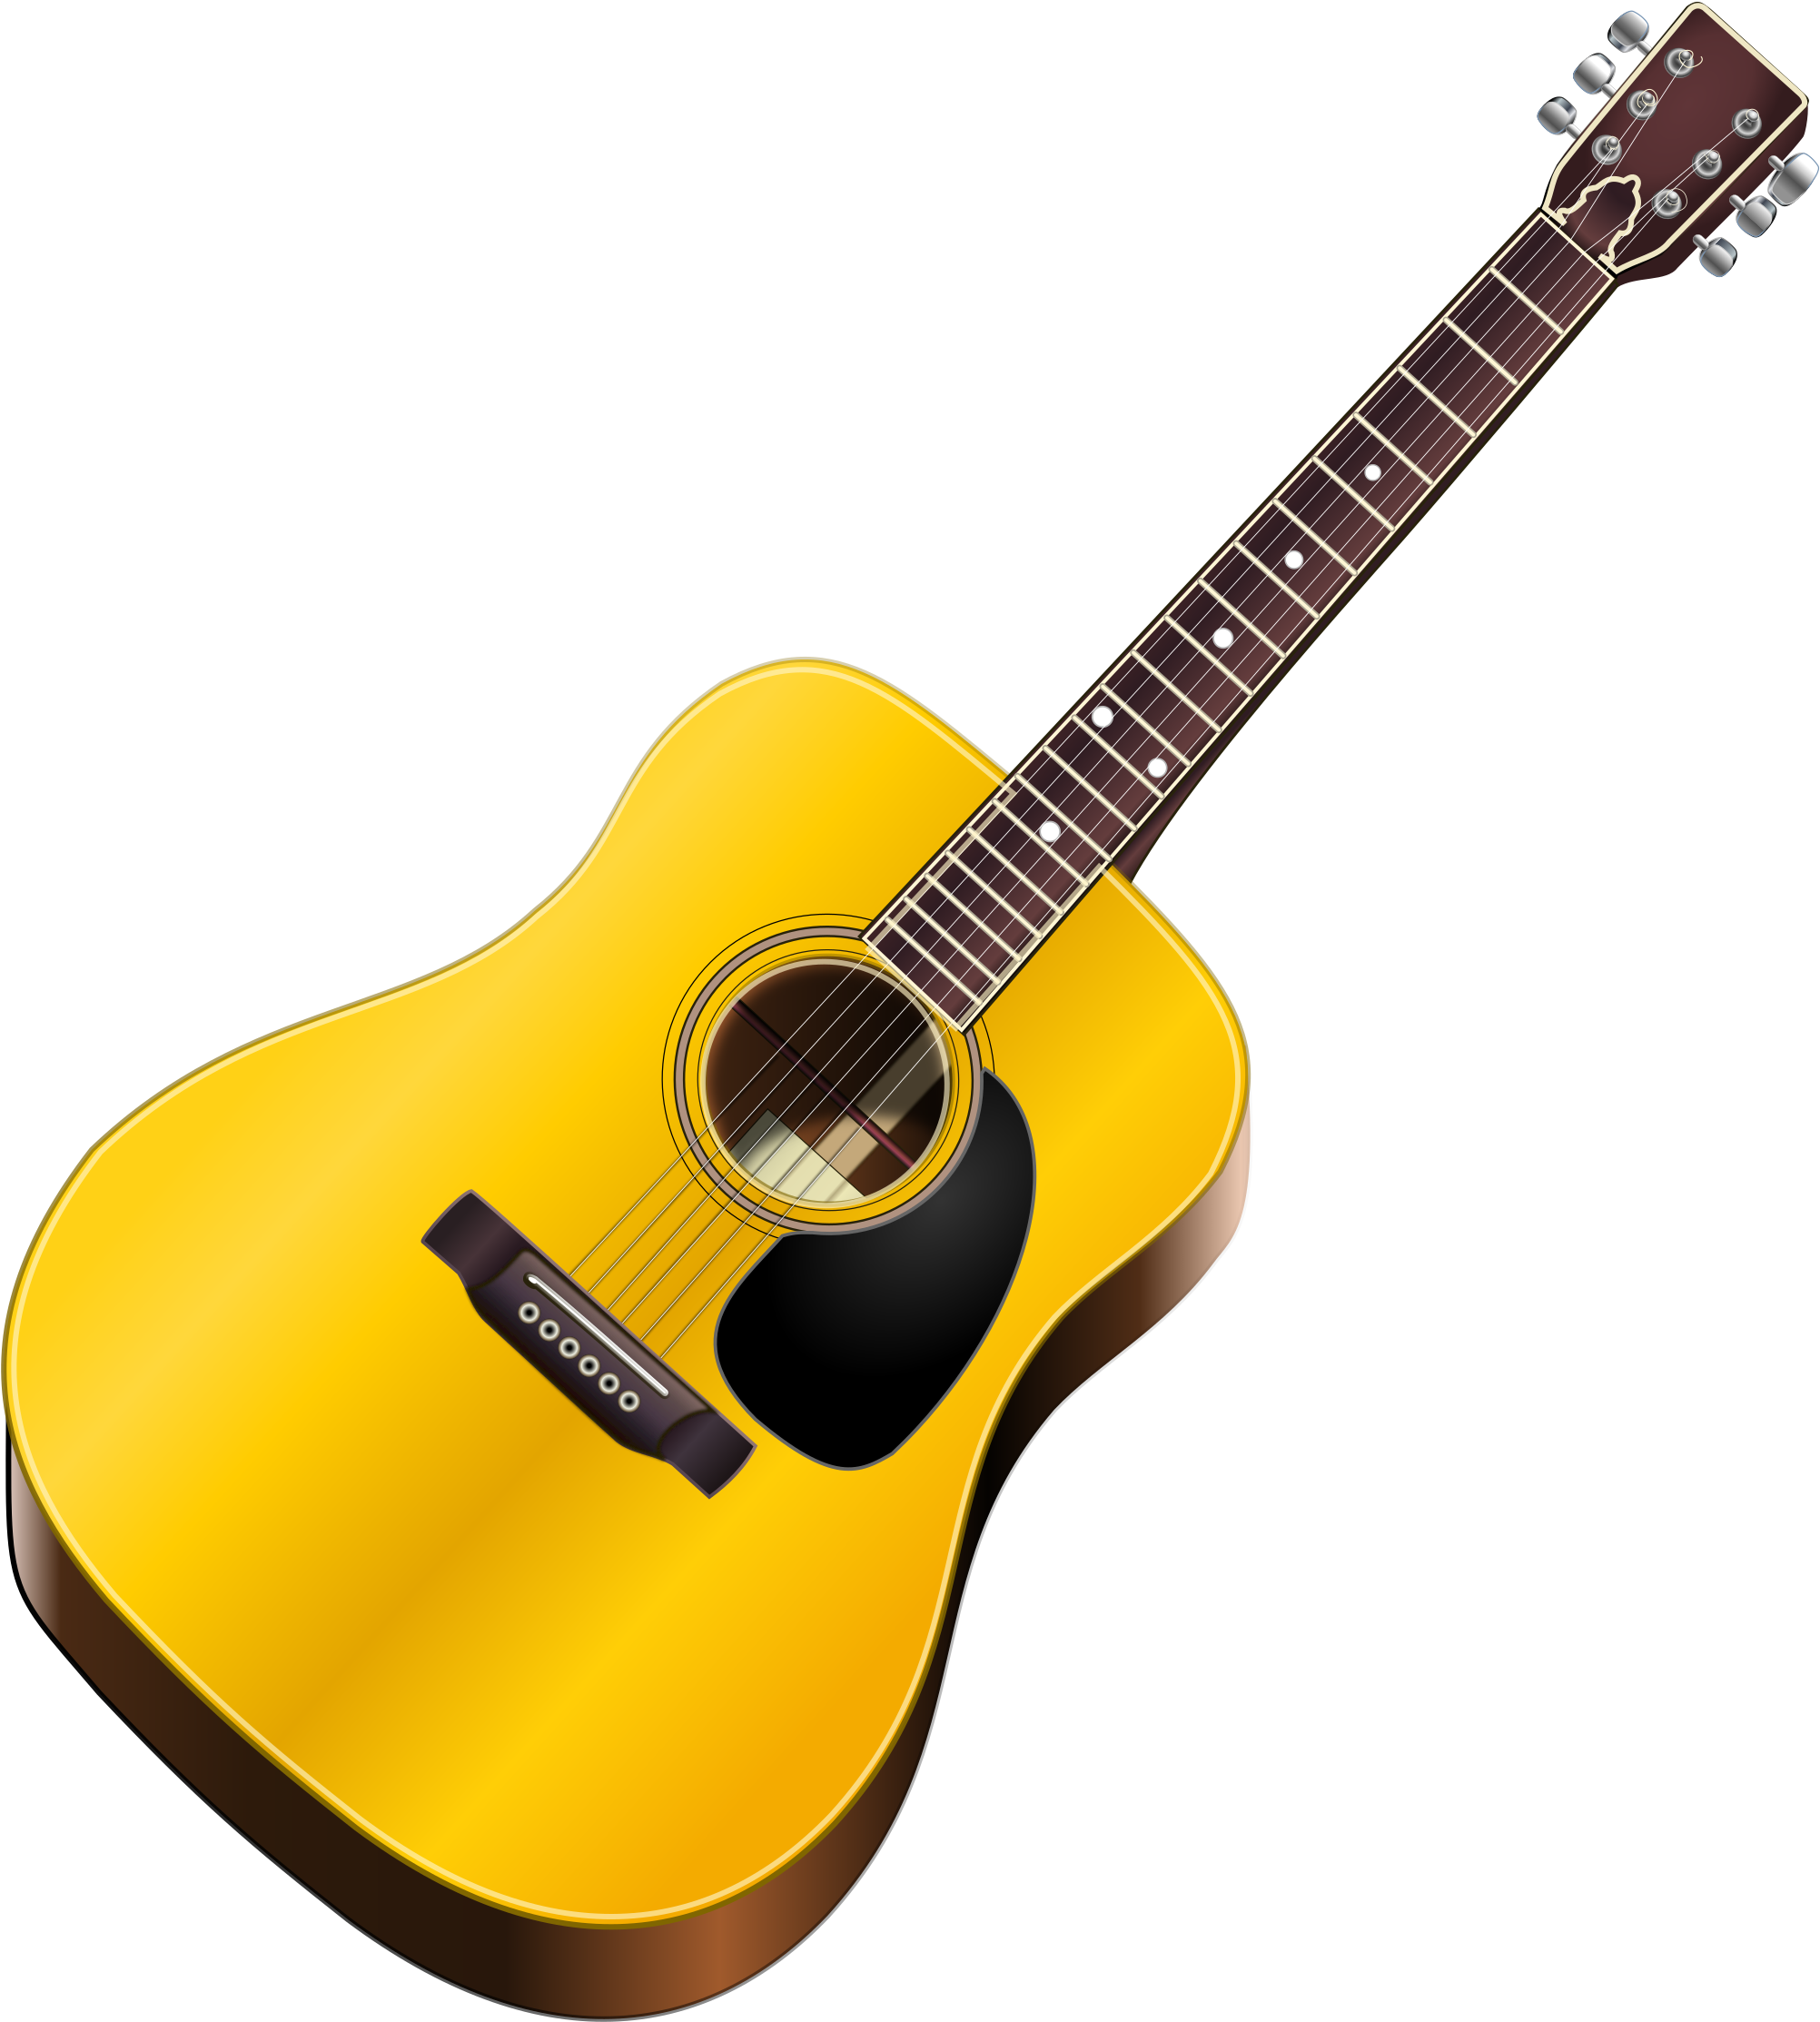 Microsoft Word 2010 Clipart Download - Cartoon Picture Of Guitar (2251x2400)